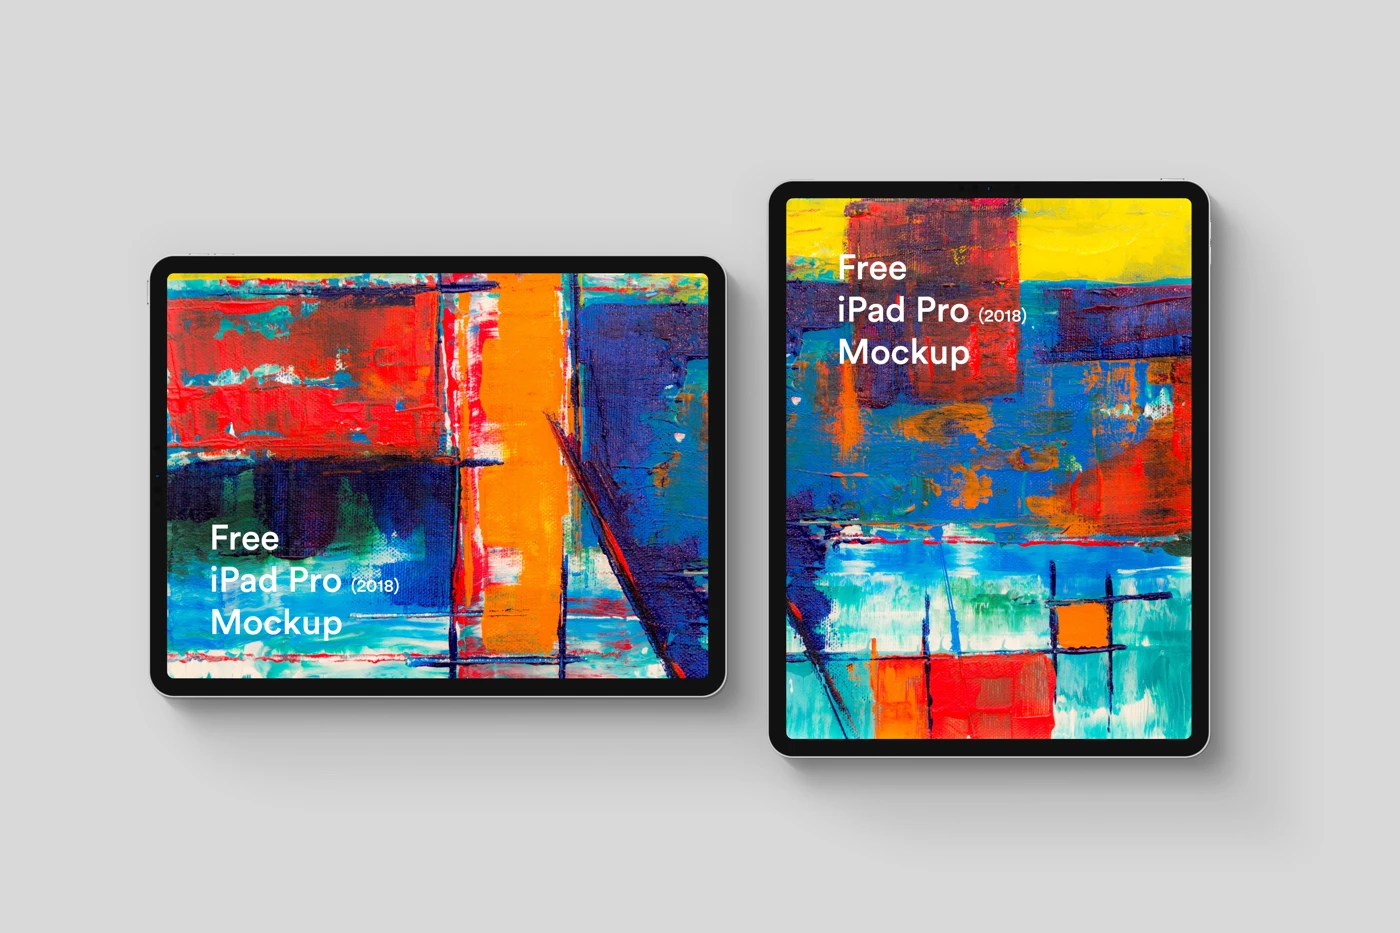 Free iPad Pro 2018 Mockup - For Sketch and Photoshop